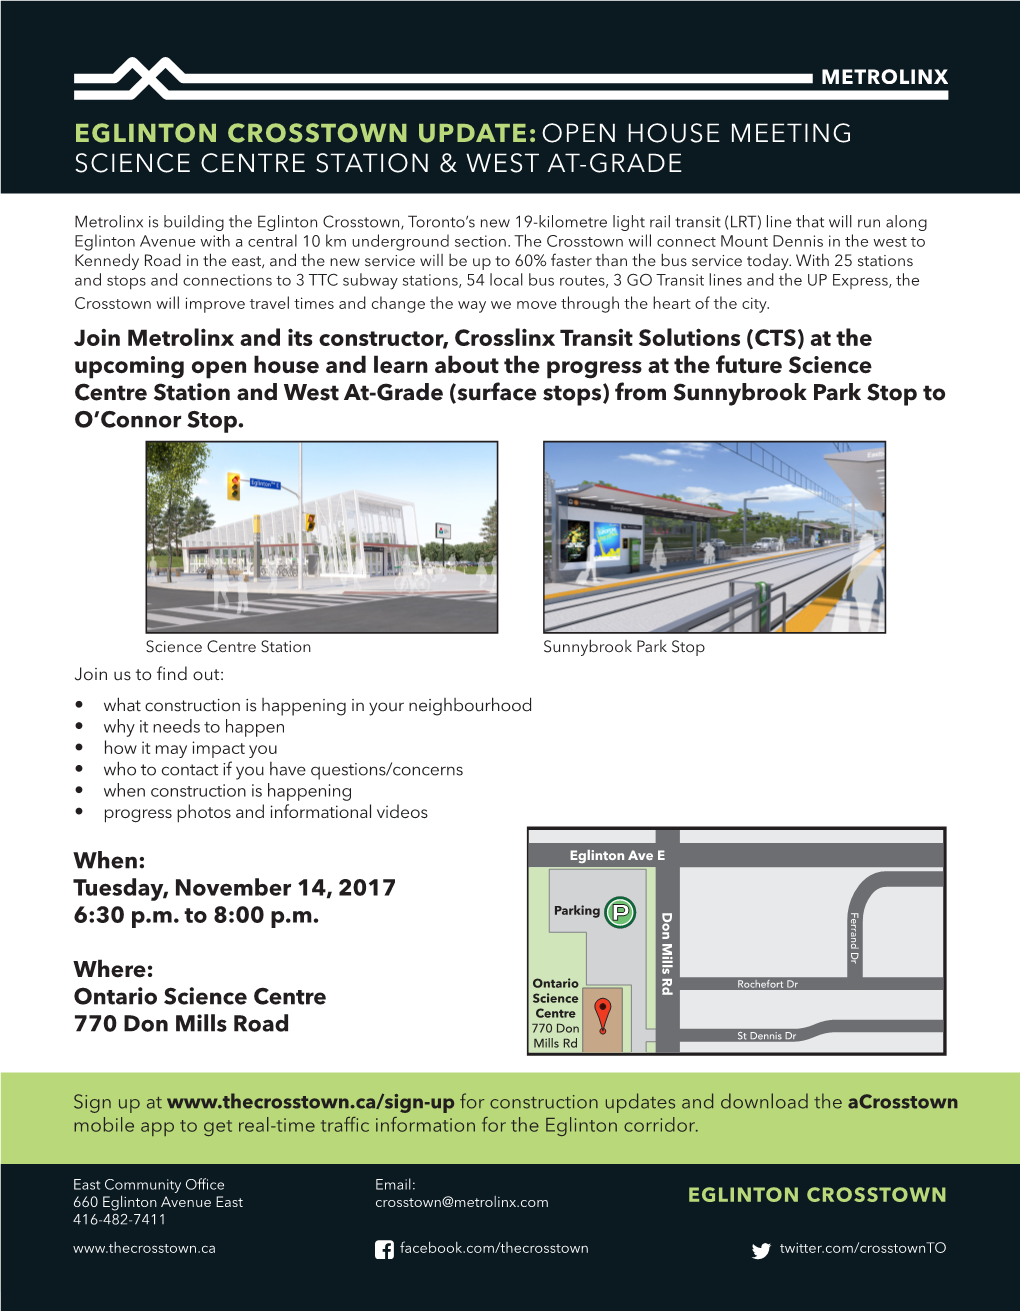 Science Centre Station & West At-Grade Open